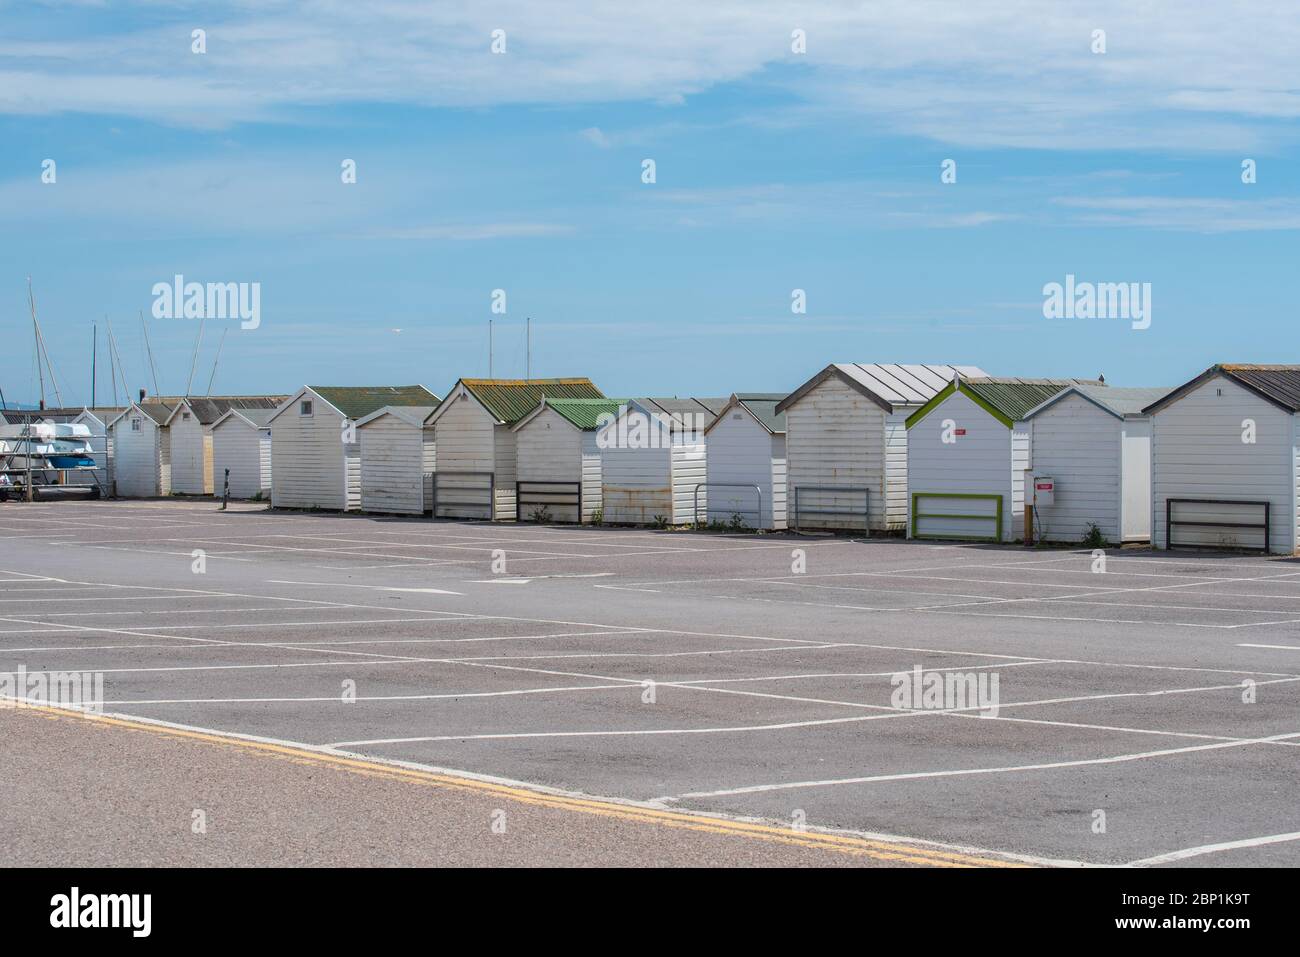 Lyme Regis, Dorset, UK. 17th May, 2020. UK Weather: A lovely warm and sunny Sunday afternoon at the seaside resort of Lyme Regis. Dorset Council operated car park at Monmouth Beach carpark remains firmly closed as visitors from outside the region are urged to 'stay away and visit later'. Credit: Celia McMahon/Alamy Live News Stock Photo